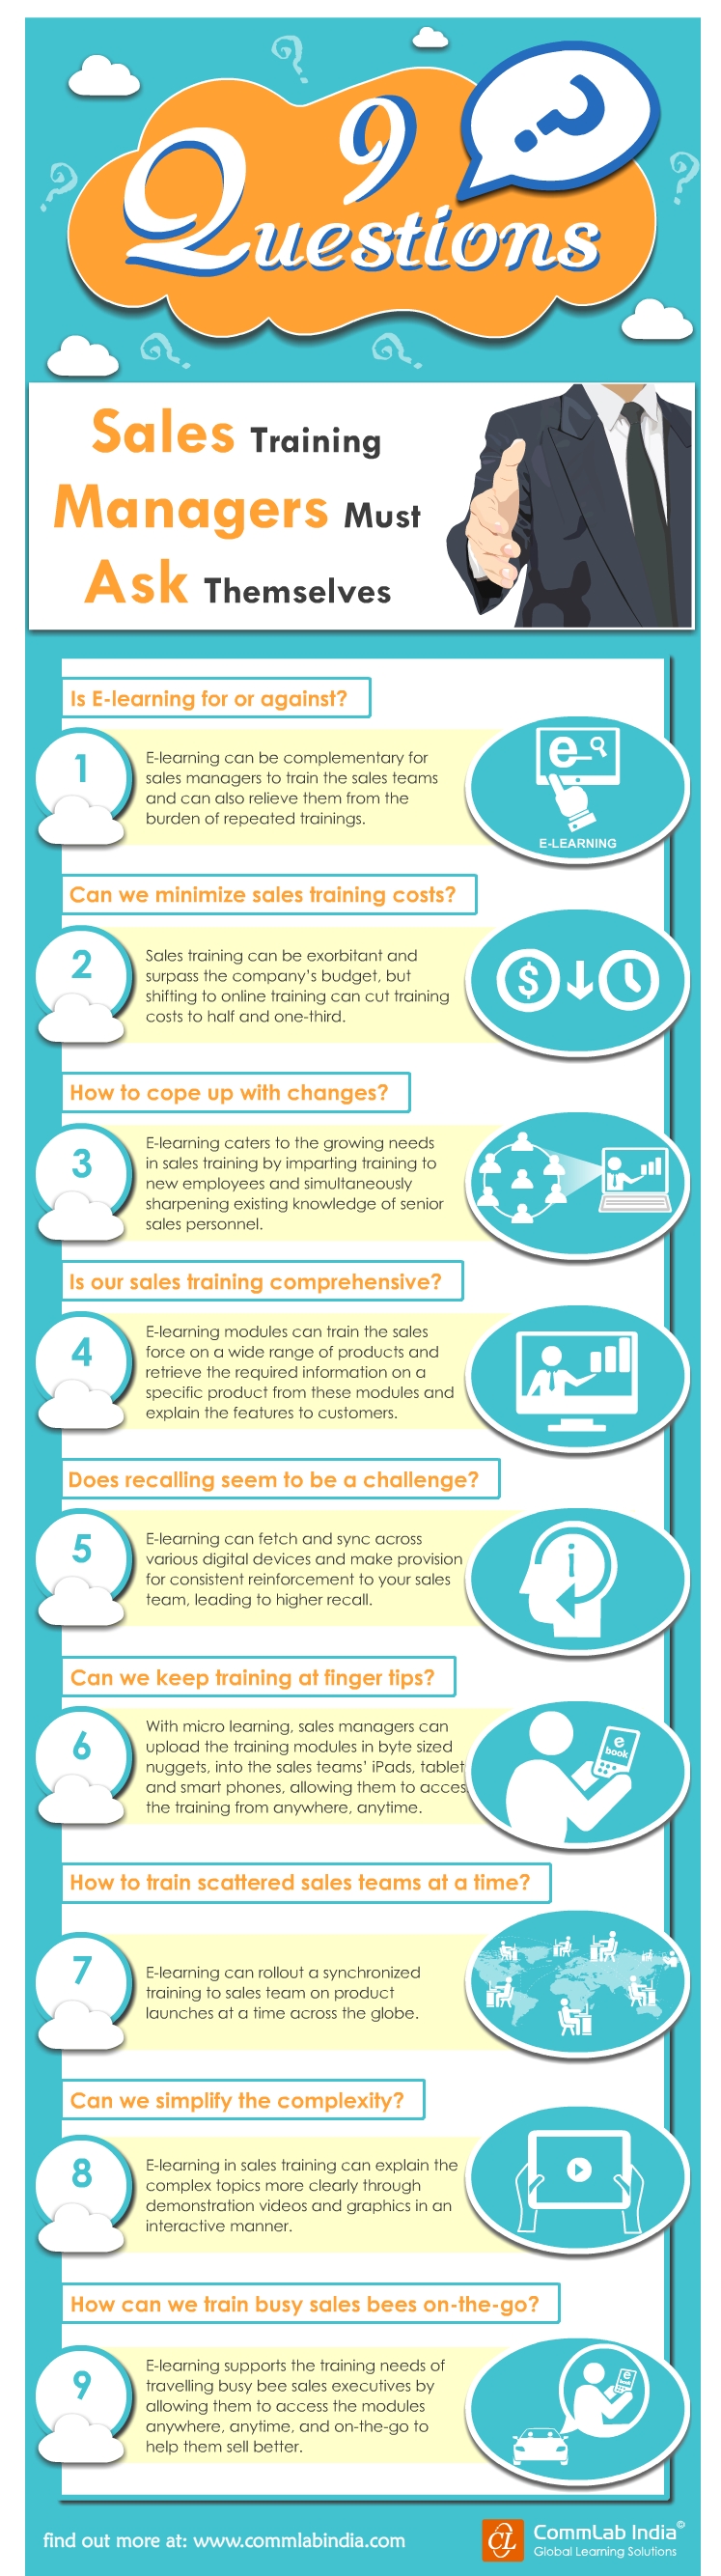 9 Questions Sales Training Managers Must Ask Themselves [Infographic]